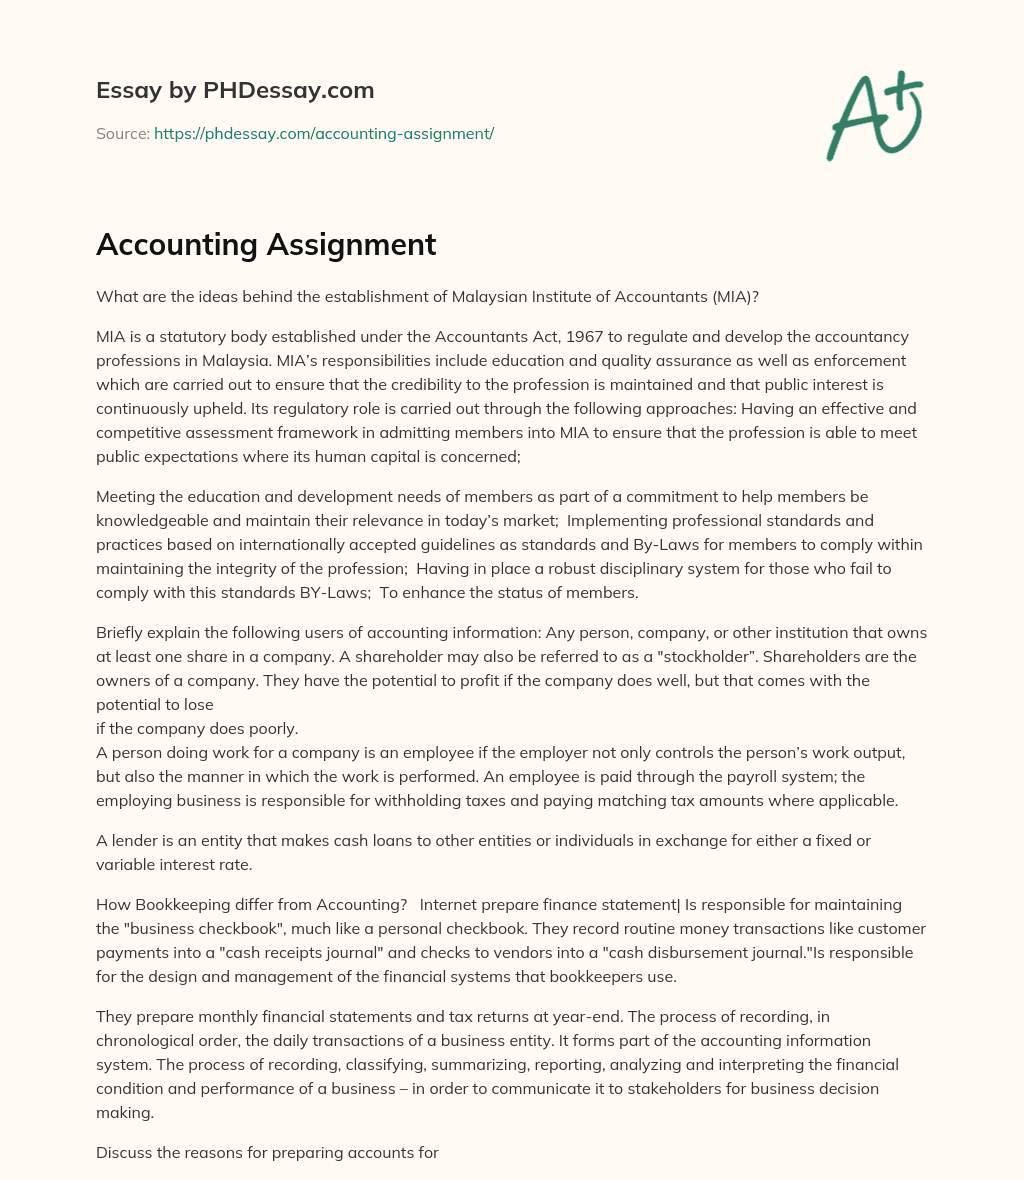 Accounting Assignment essay